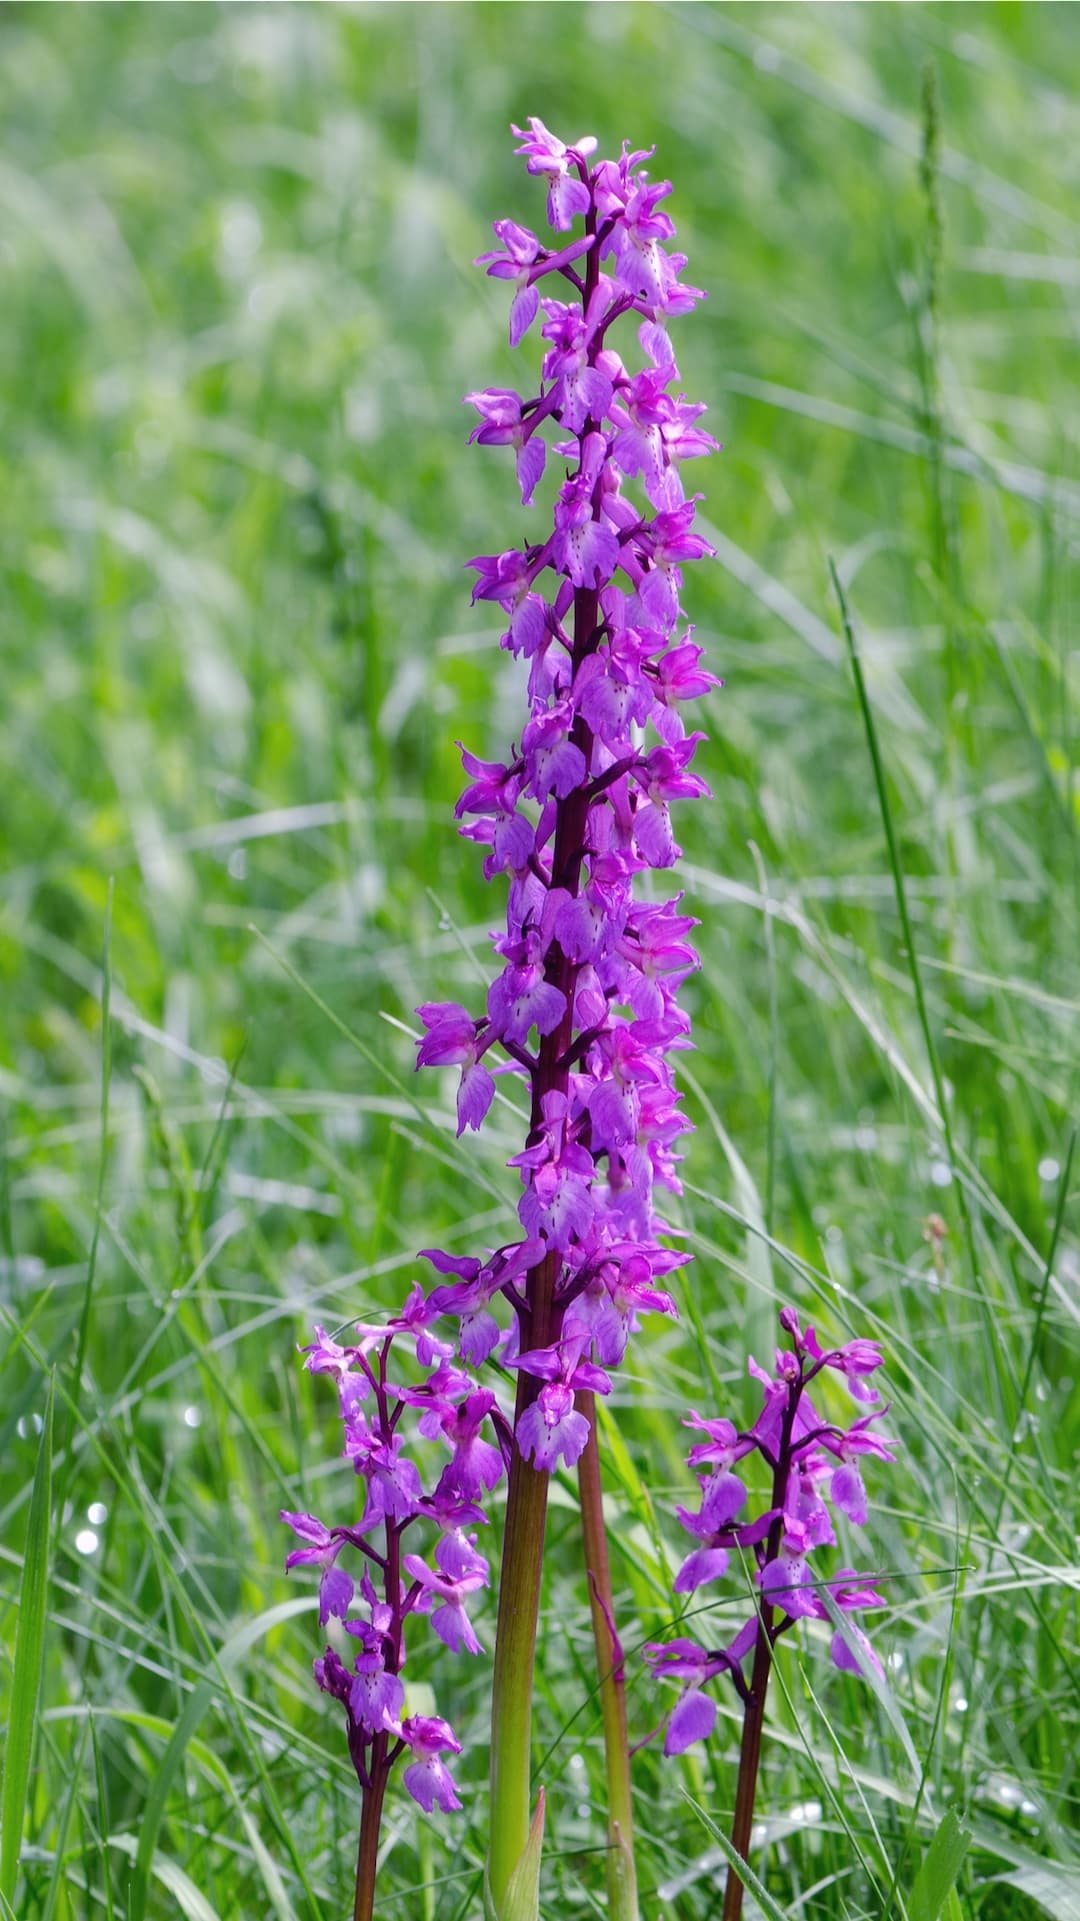 Orchis mascula (the early purple orchid), Tuxyso / Wikimedia Commons / CC-BY-SA-3.0